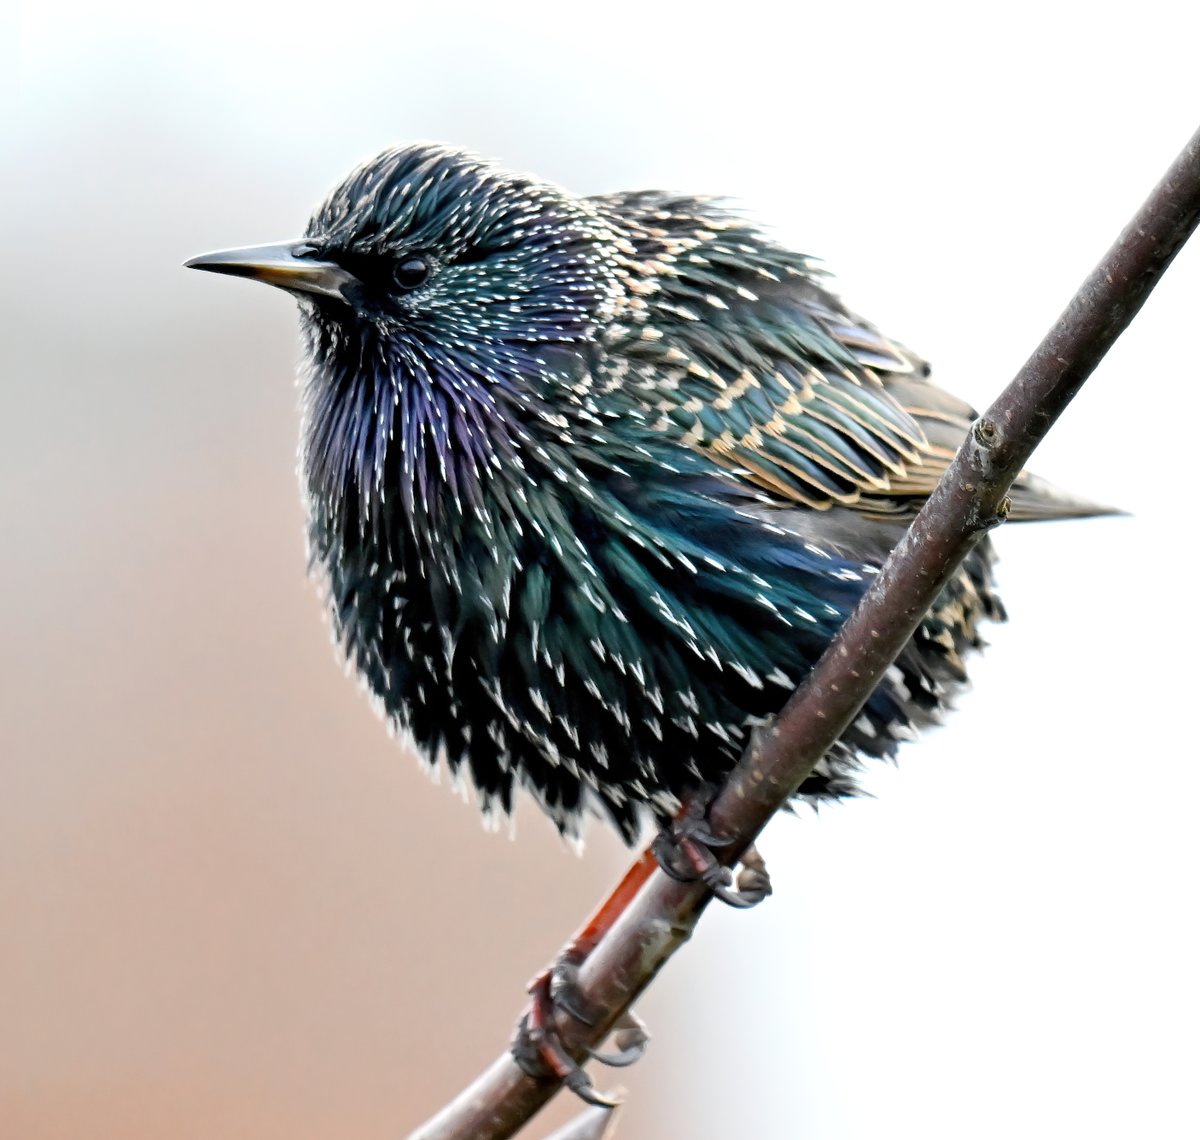 As it's Friday, I'm asking all my followers to please retweet this tweet to help my little bird account beat the algorithm and be seen!🙏😊 To make it worth sharing, here's a little ball of Starling outside my bathroom window. 😍 Thank you so much! 🙏♥️ #FridayRetweetPlease